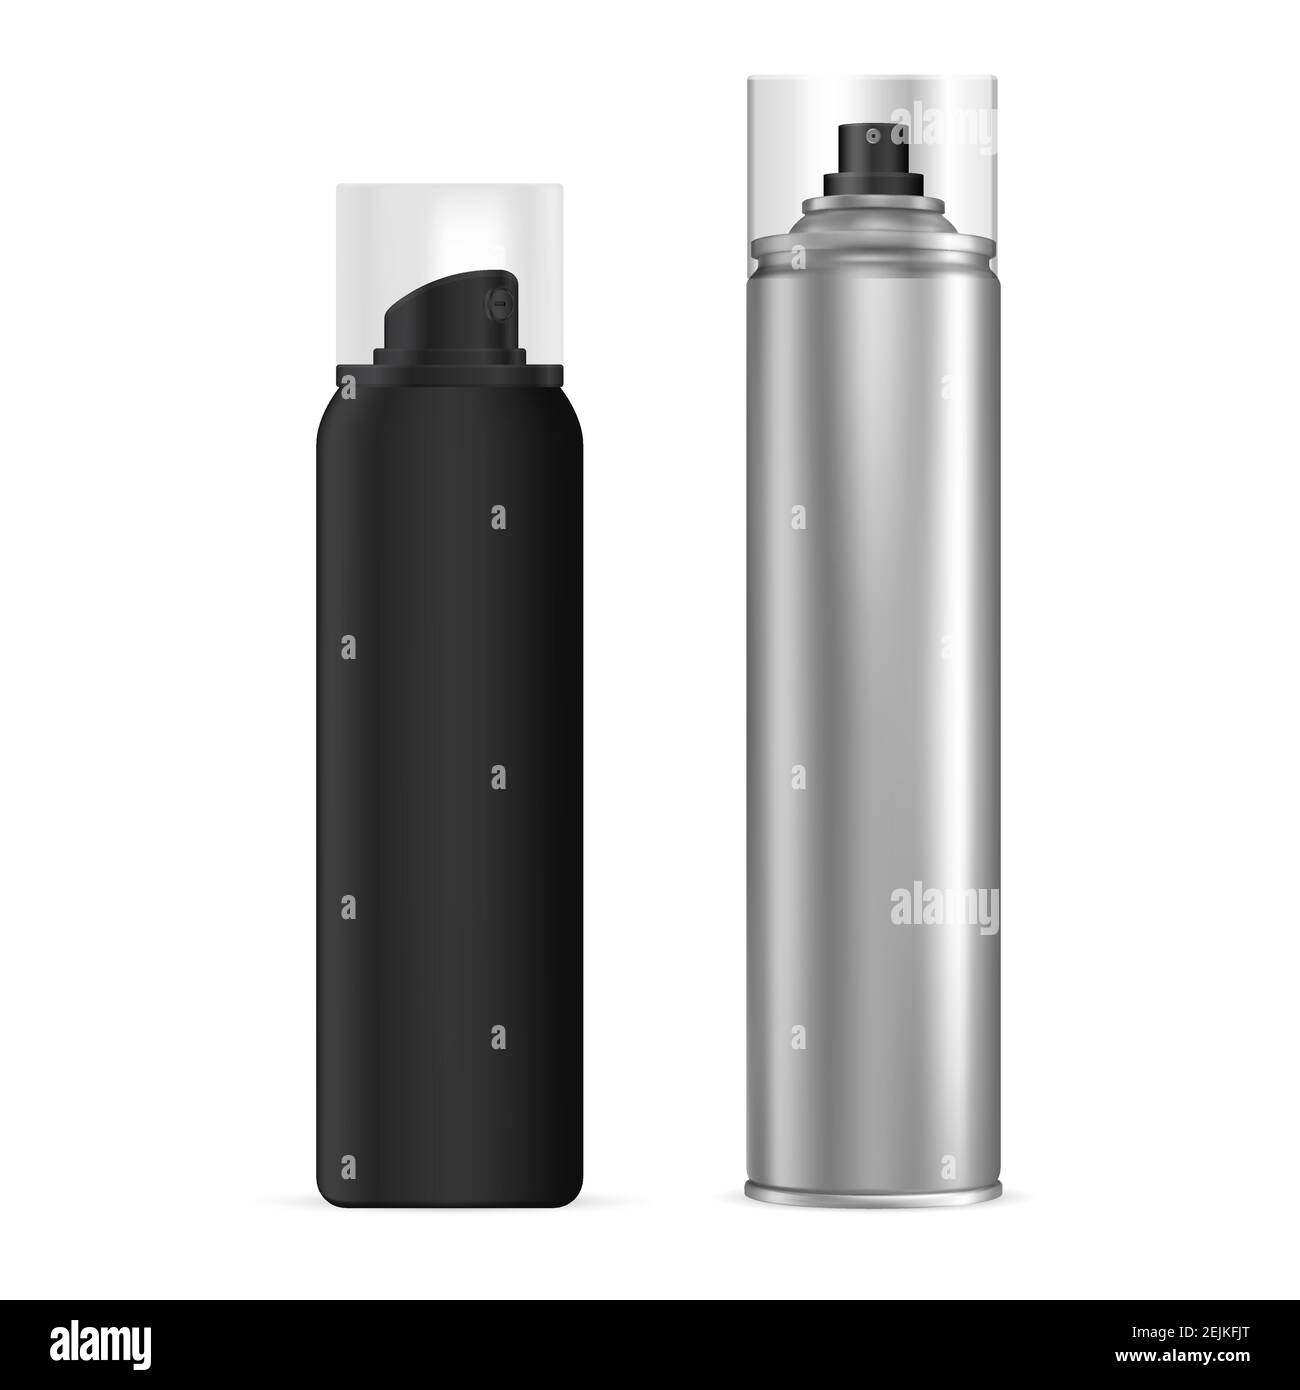 Download Spray Bottle Aerosol Spray Can Hairspray Mockup Aluminum Blank Cylinder Tube Air Freshener Design Cosmetic Sprayer Container 3d Package Template Stock Vector Image Art Alamy